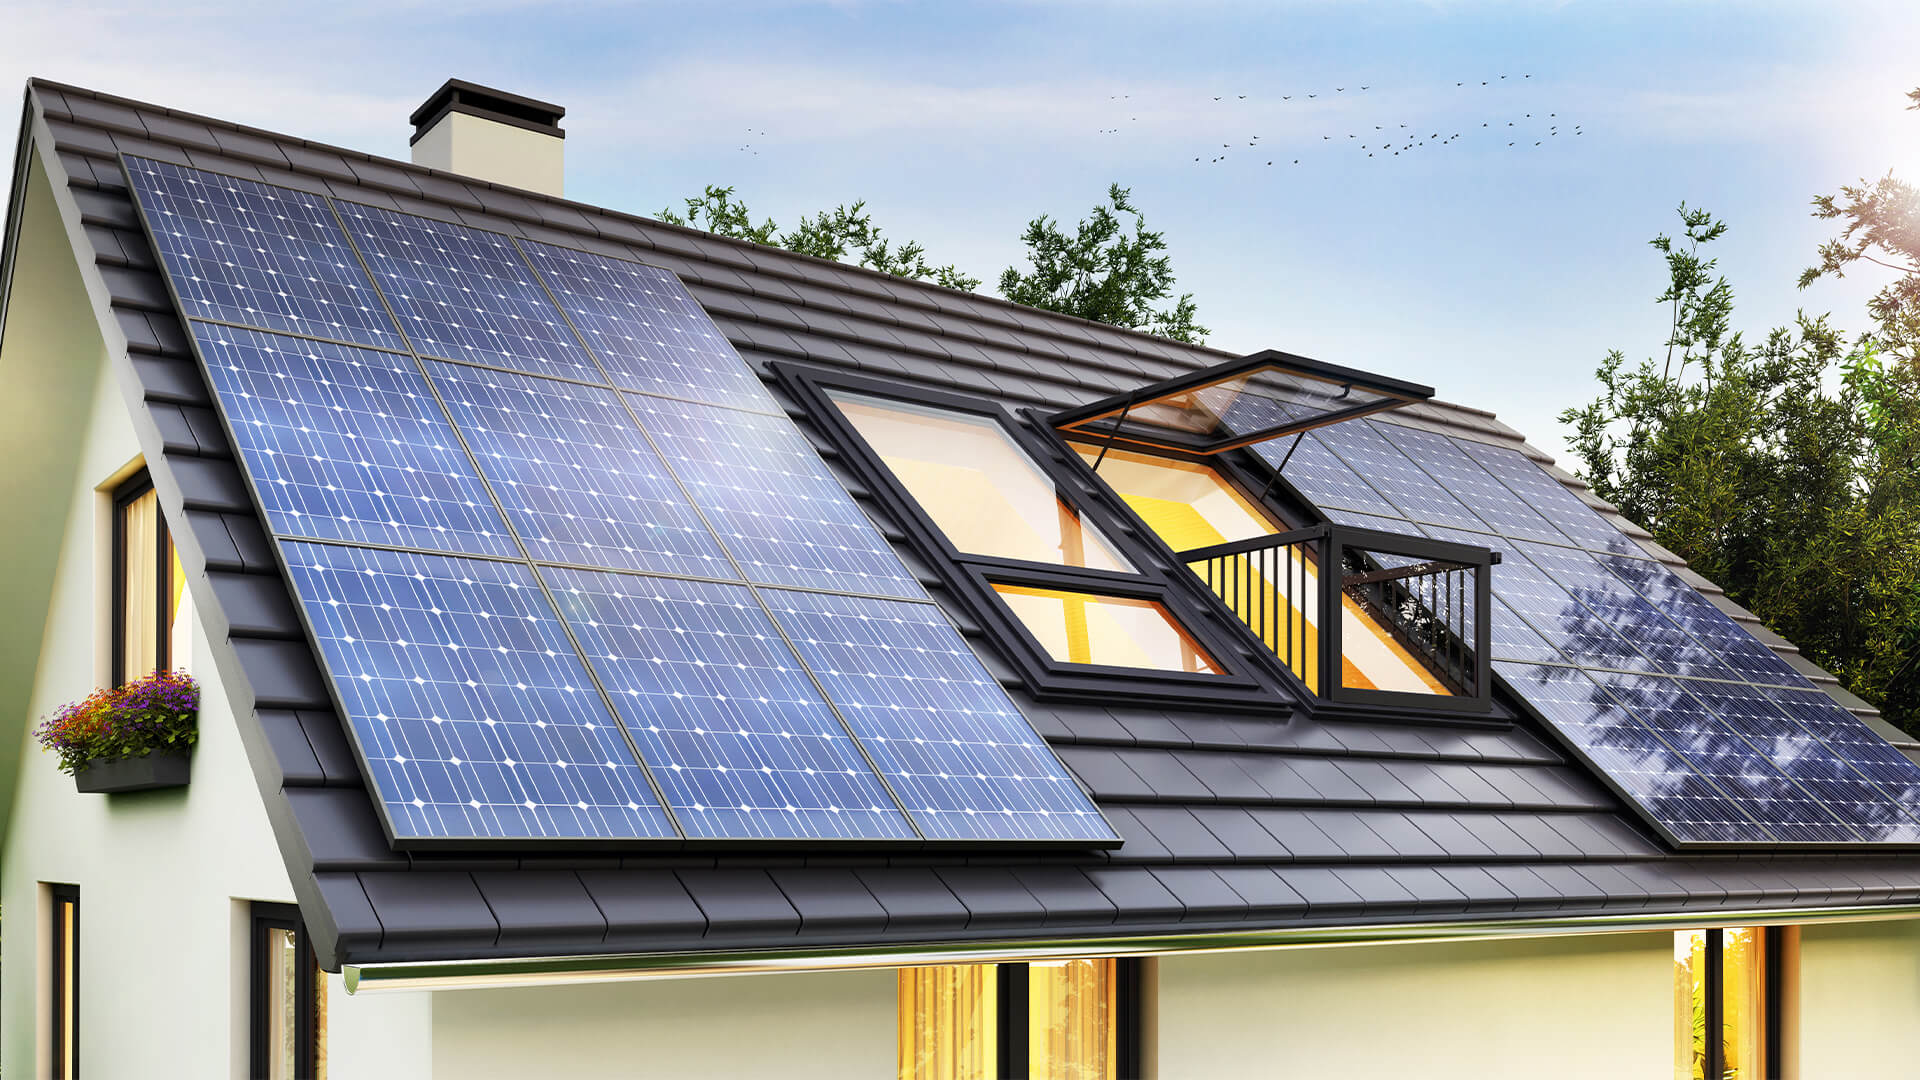 Is it good to have solar panels in your house